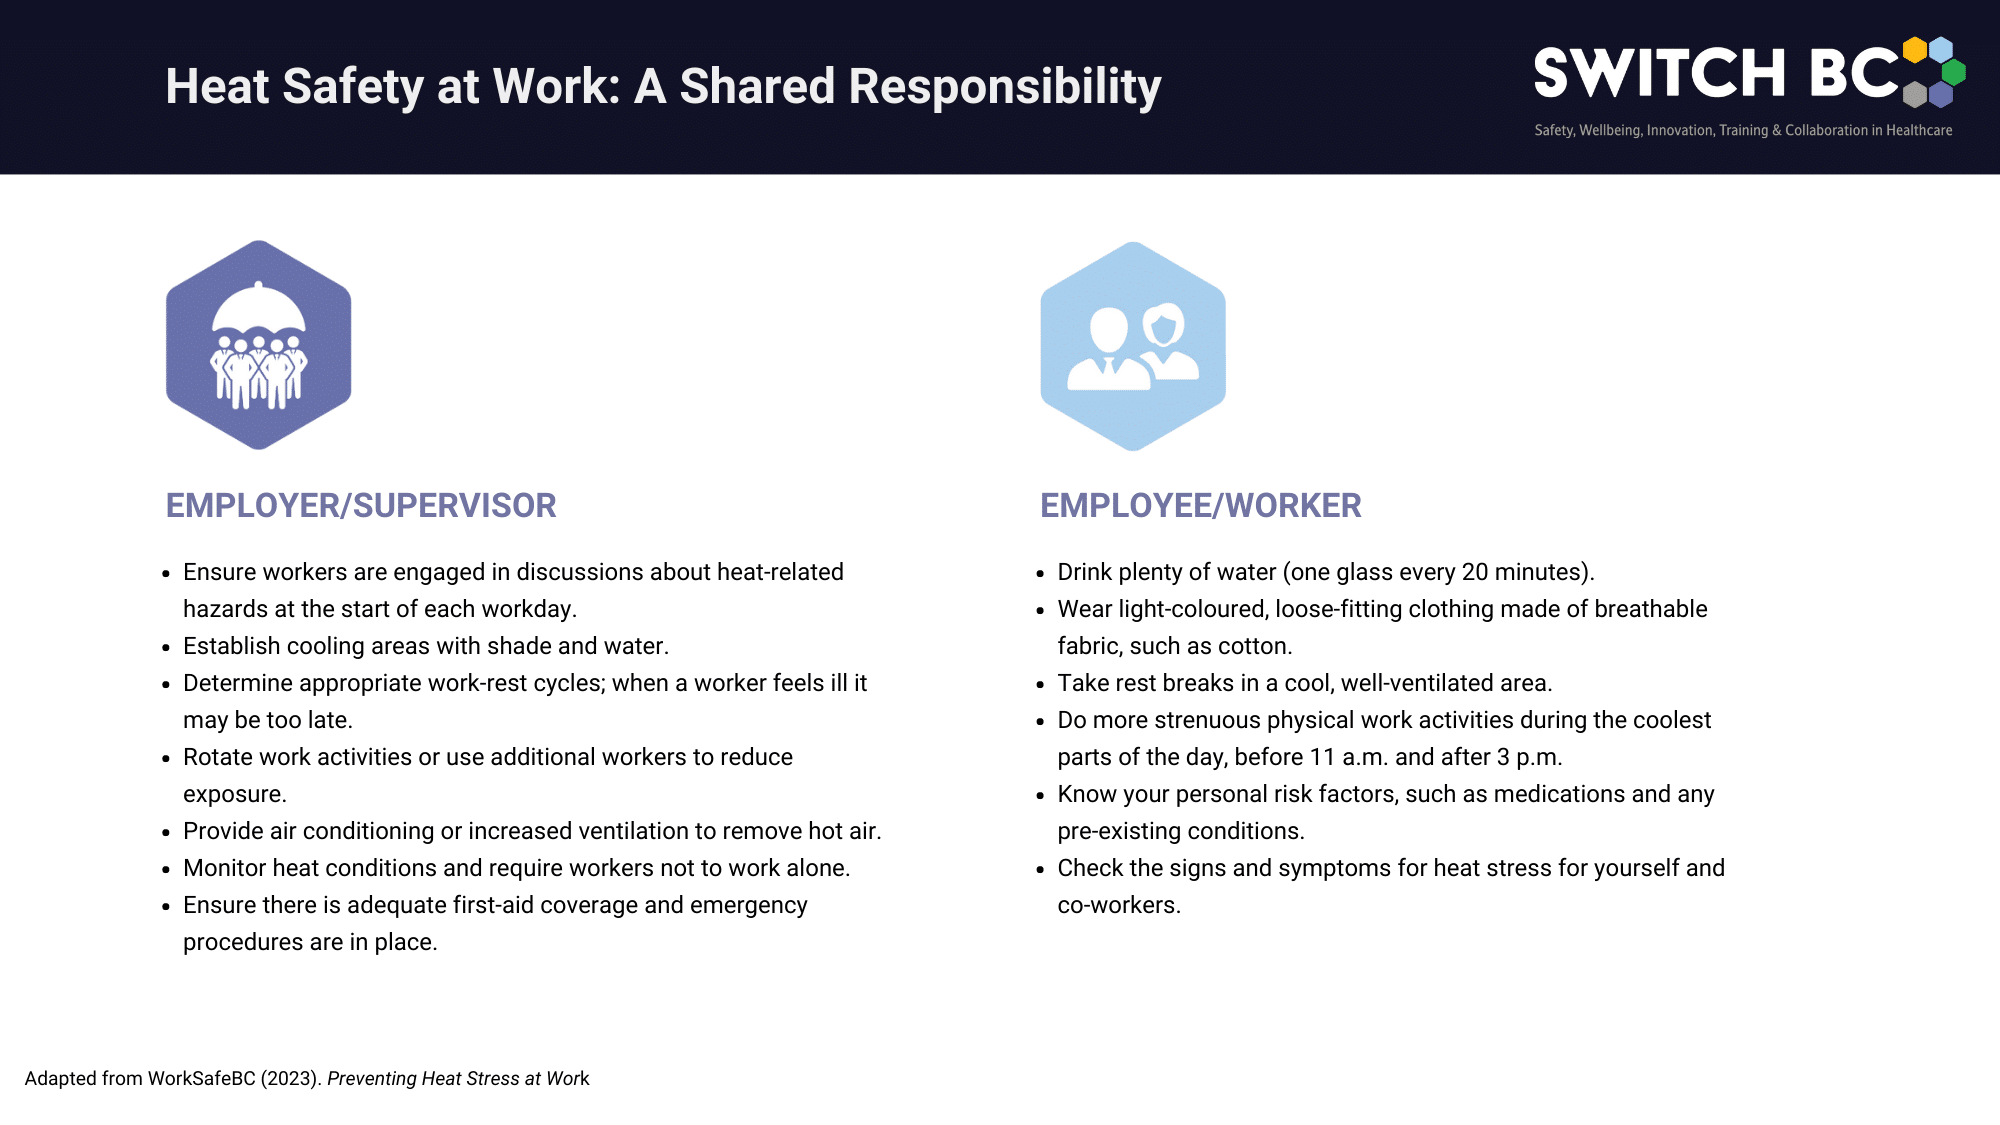 https://switchbc.ca/wp-content/uploads/2023/07/Heat-Safety-at-Work-A-Shared-Responsibility.png